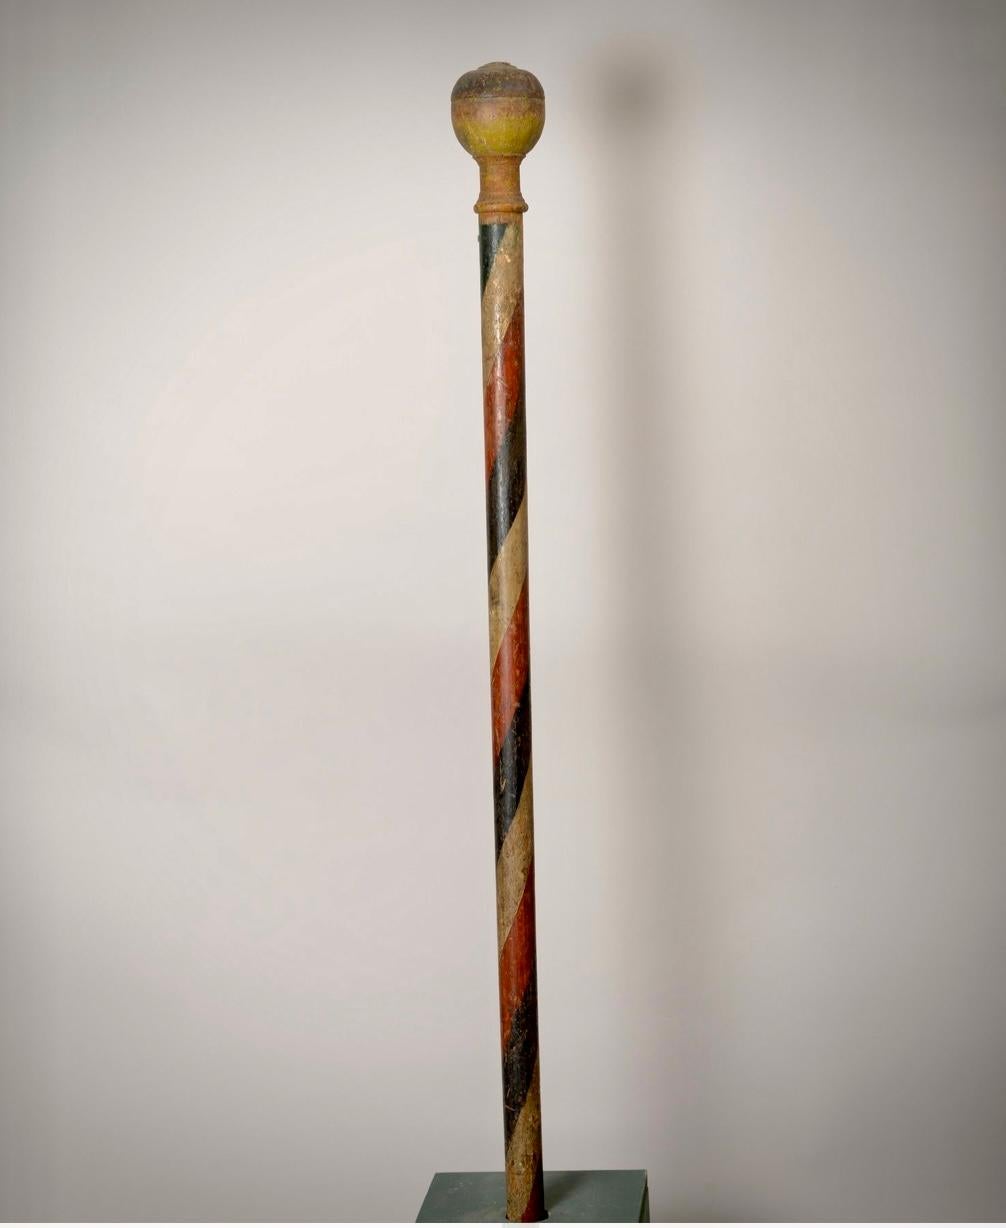 A Fine and Rare Early Barbers Pole, Early 18th Century, English School - Sculpture by 19th Century English School